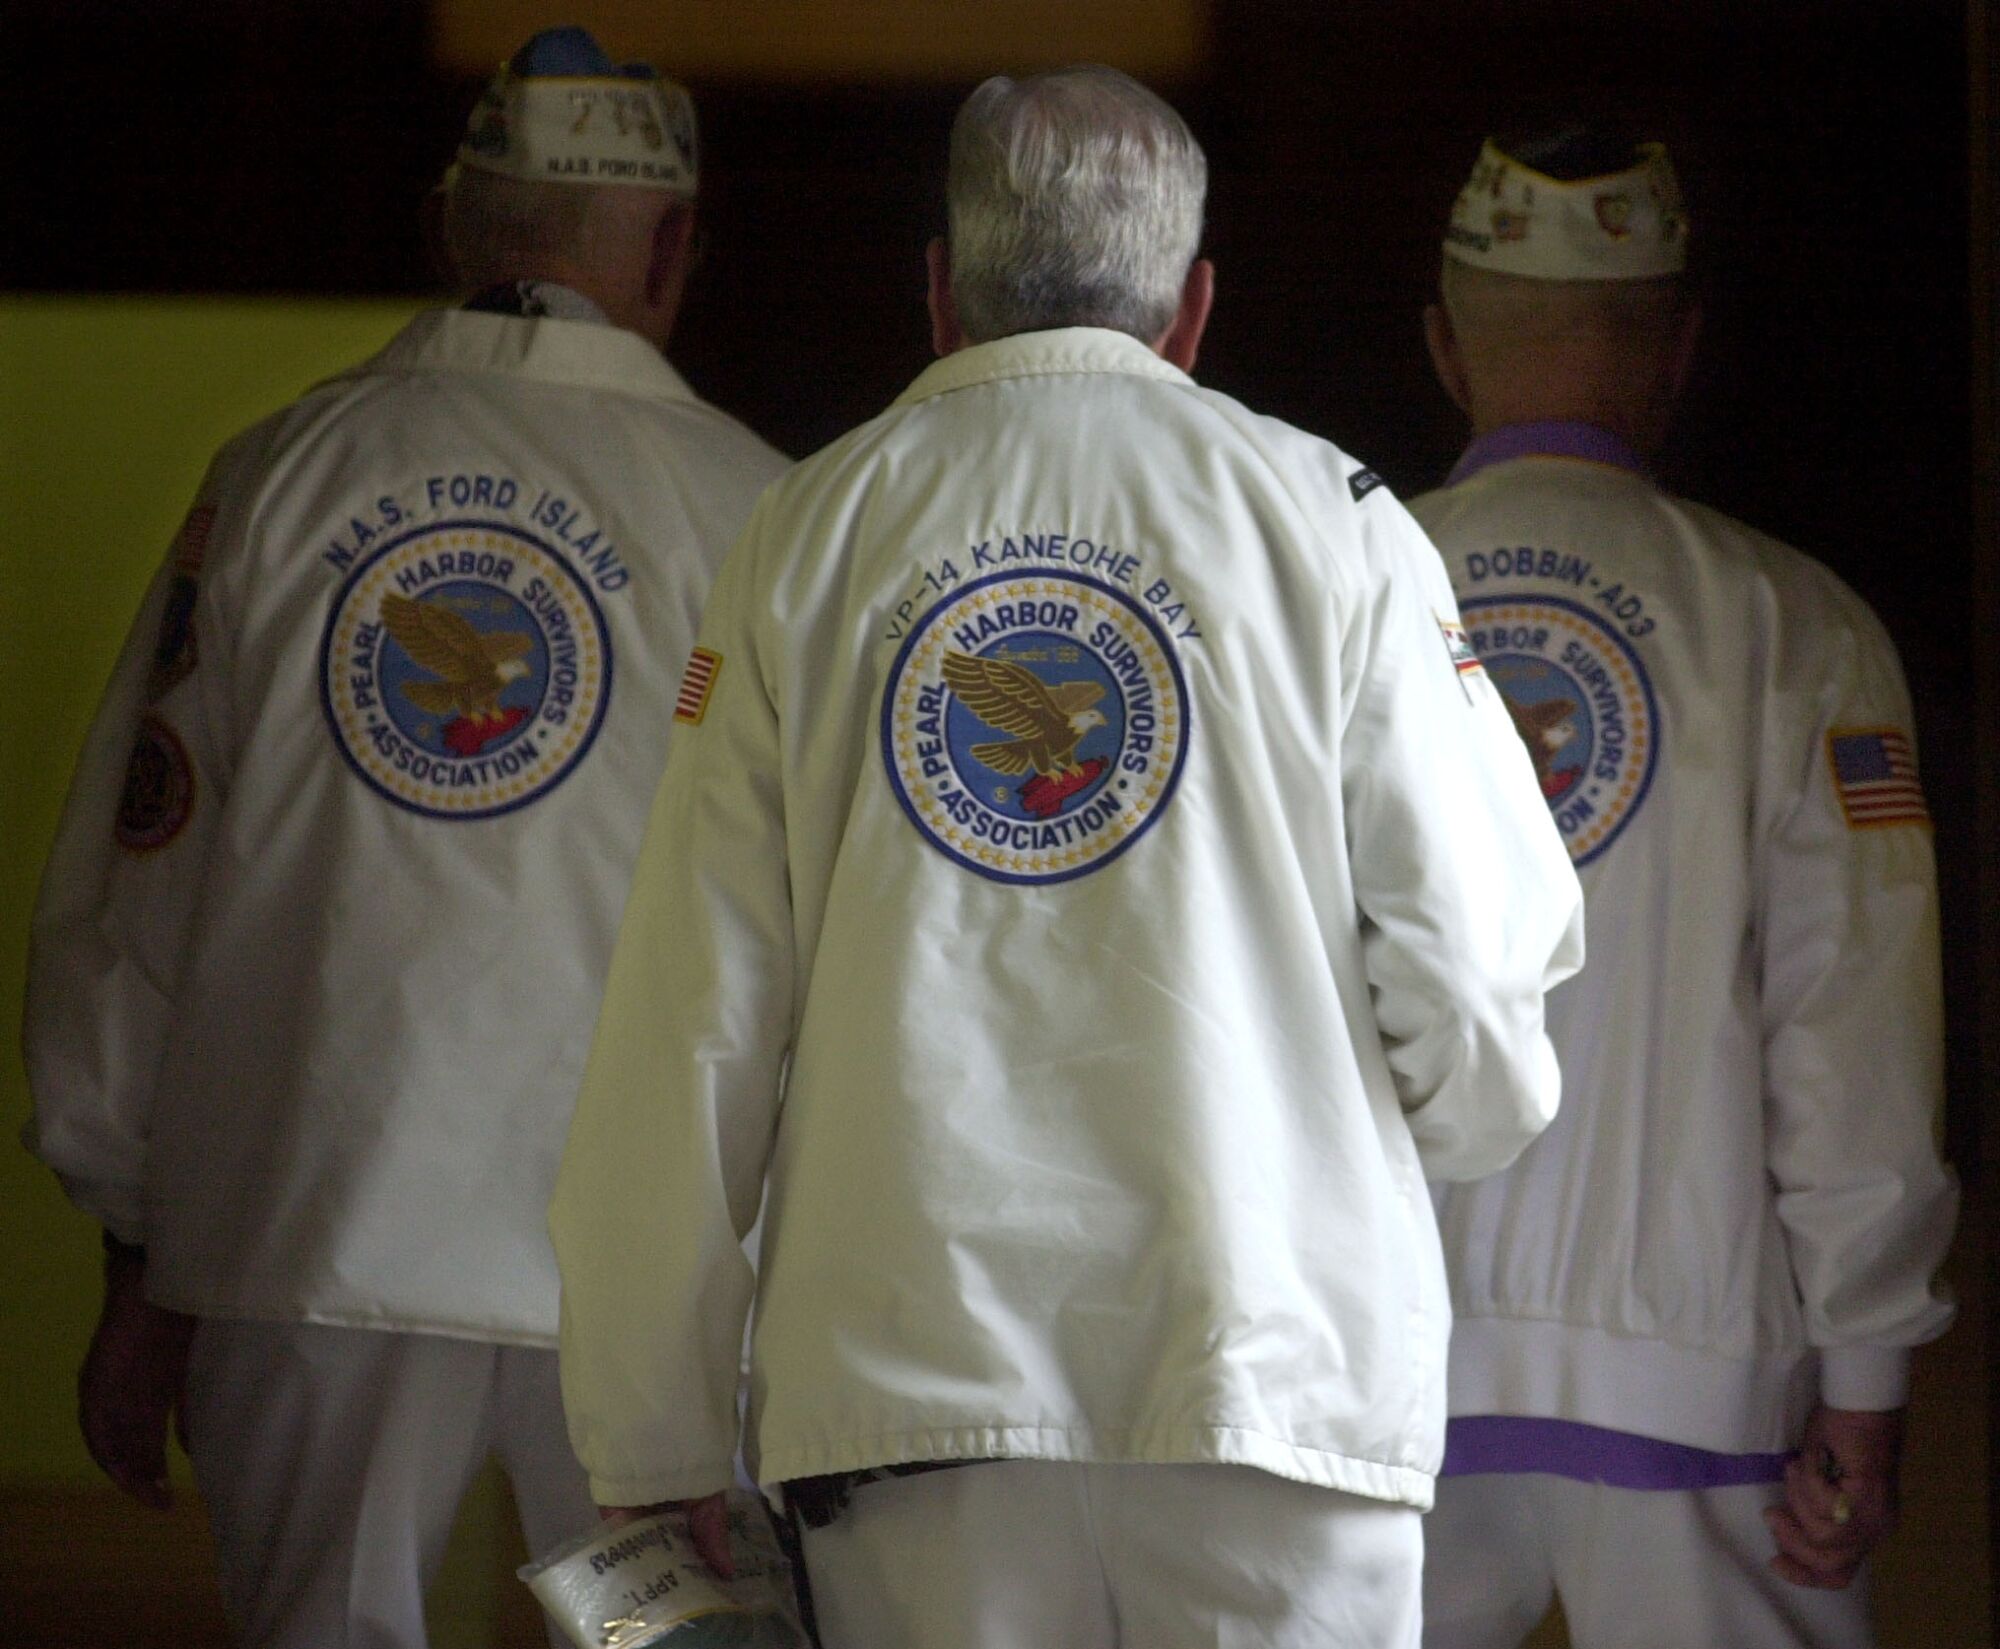 Members of The Pearl Harbor Survivors Association walk down a hall